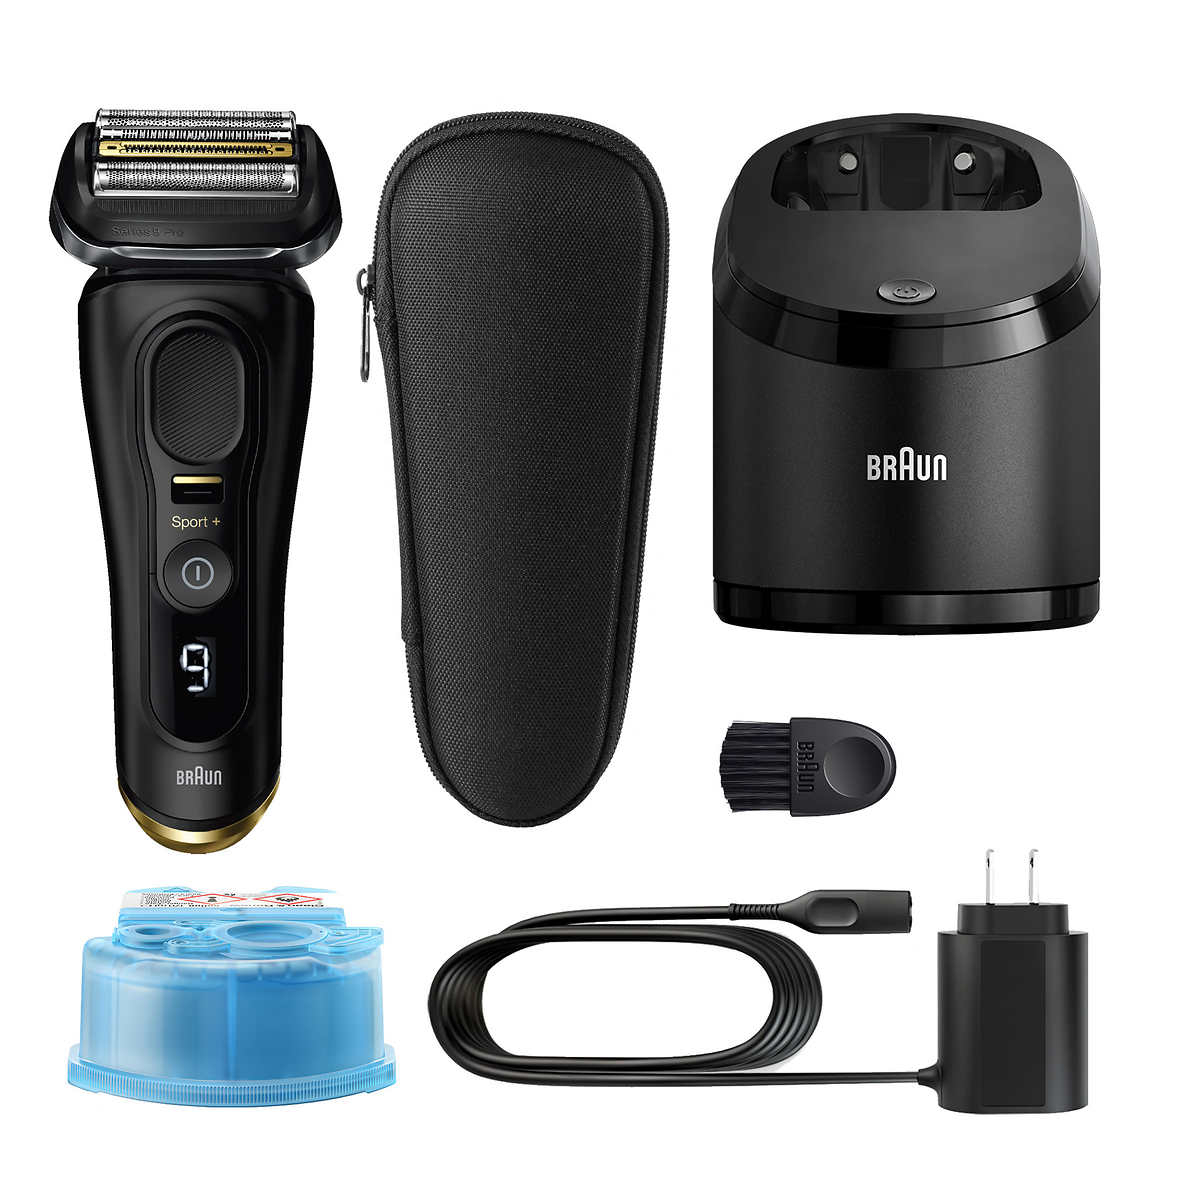 Braun Series 9 Sport + Shaver With Clean And Charge System